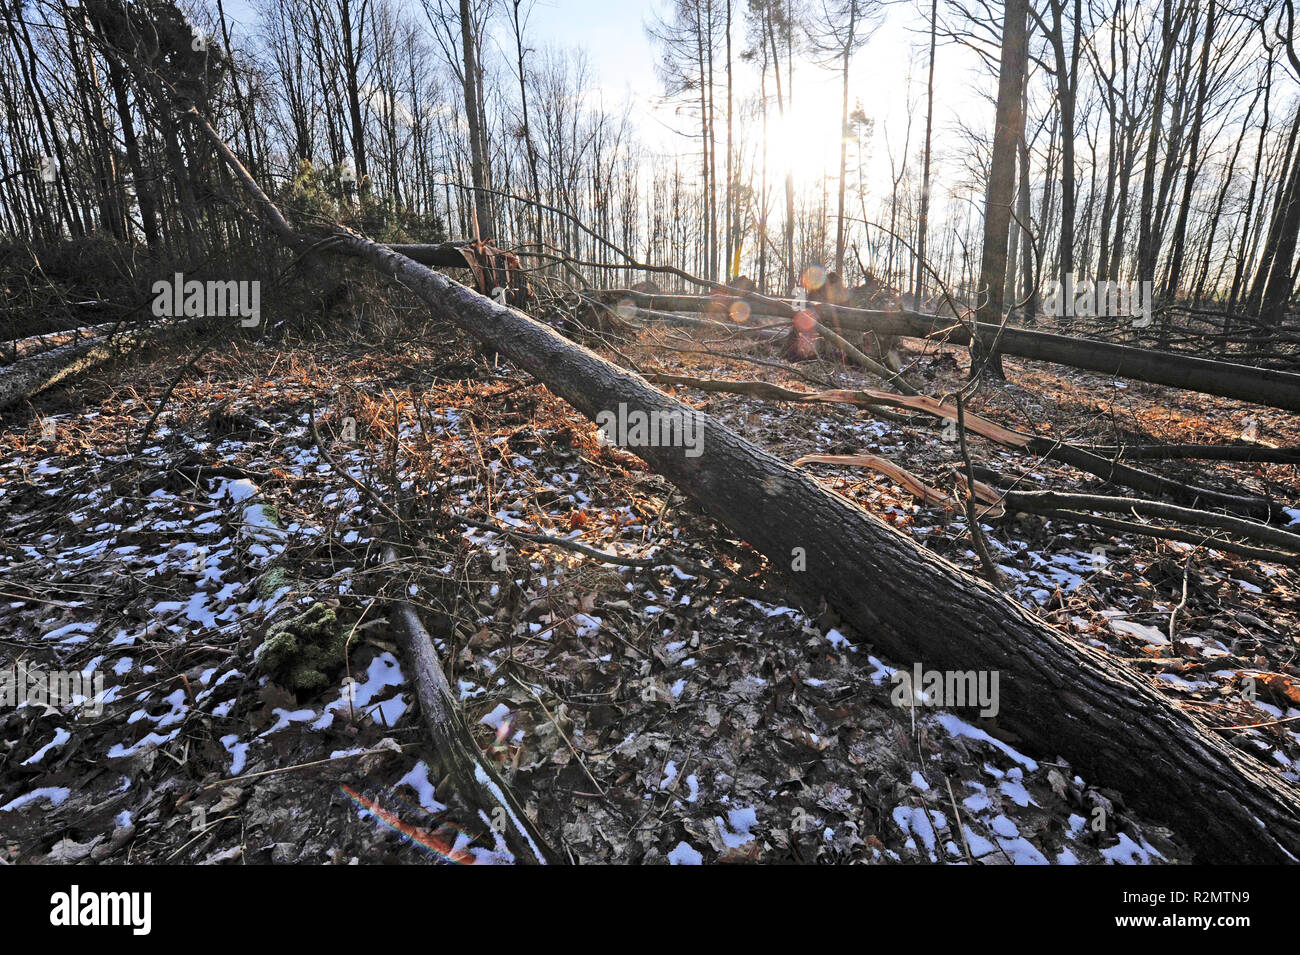 Storm 'Friederike' swept across Saxony at the end of January 2018 in hurricane force and left heavy damage in the forests of Saxony through fallen trees, like here in Colditzer Wald Stock Photo